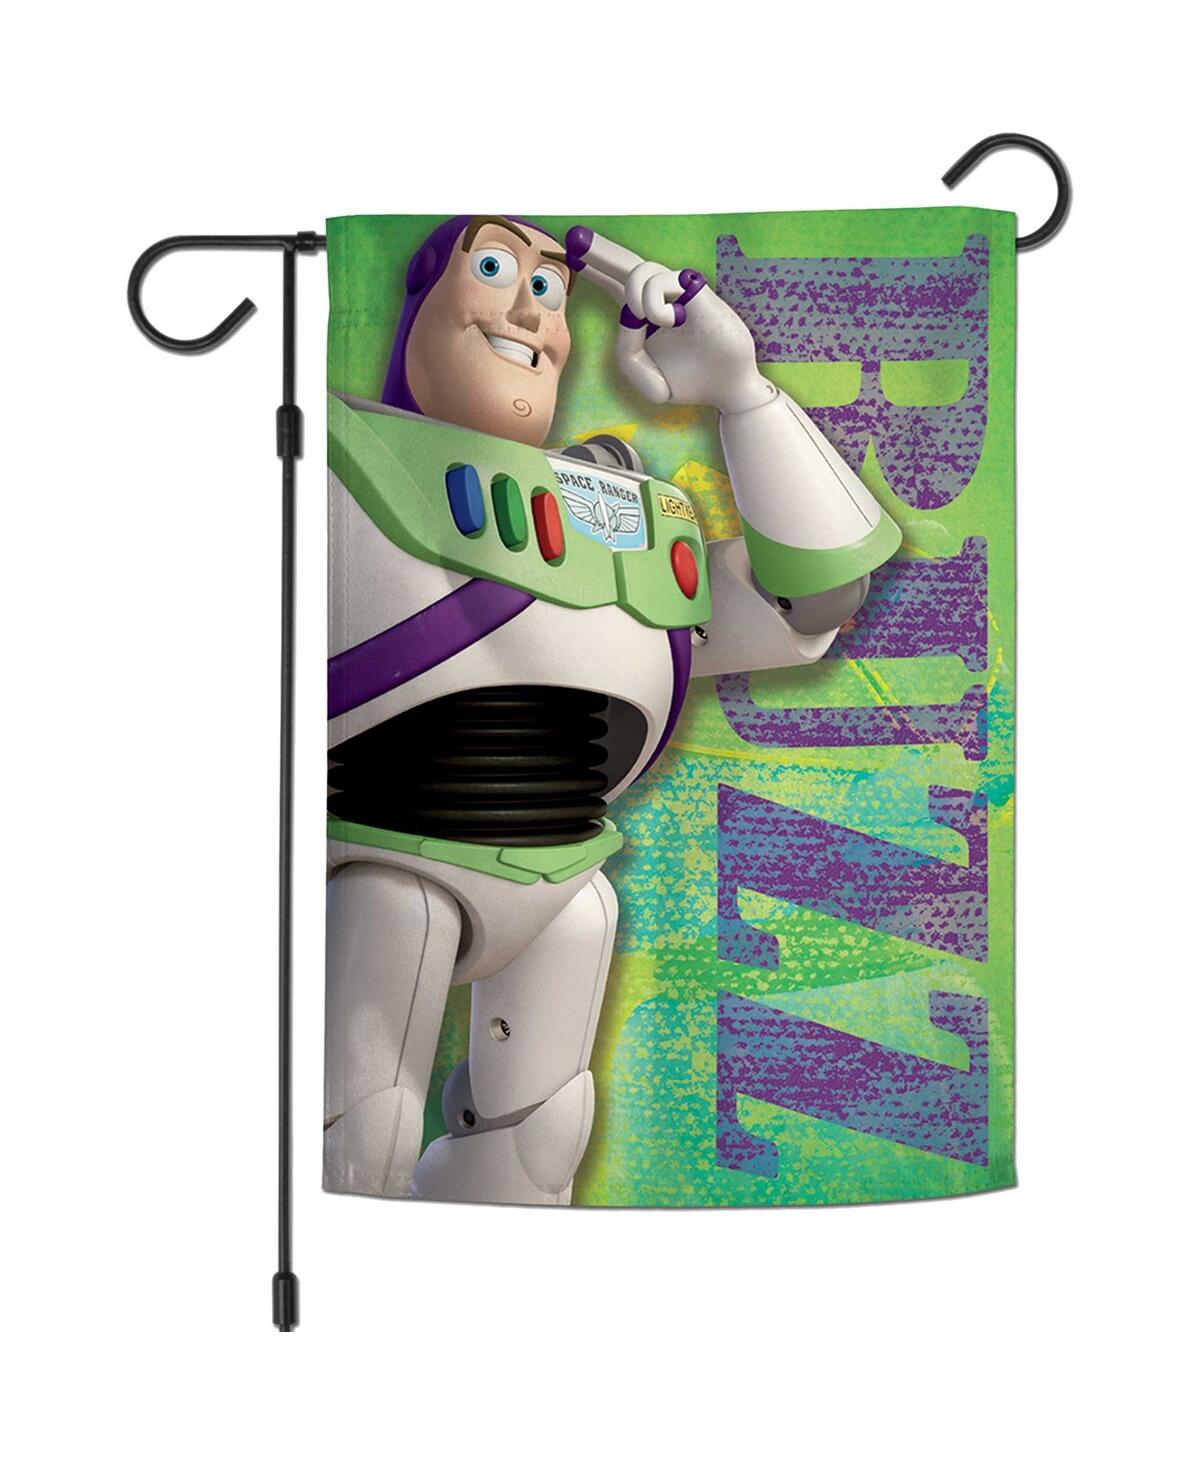 Wincraft Toy Story 12.5" X 18" Double-sided Garden Flag In Multi